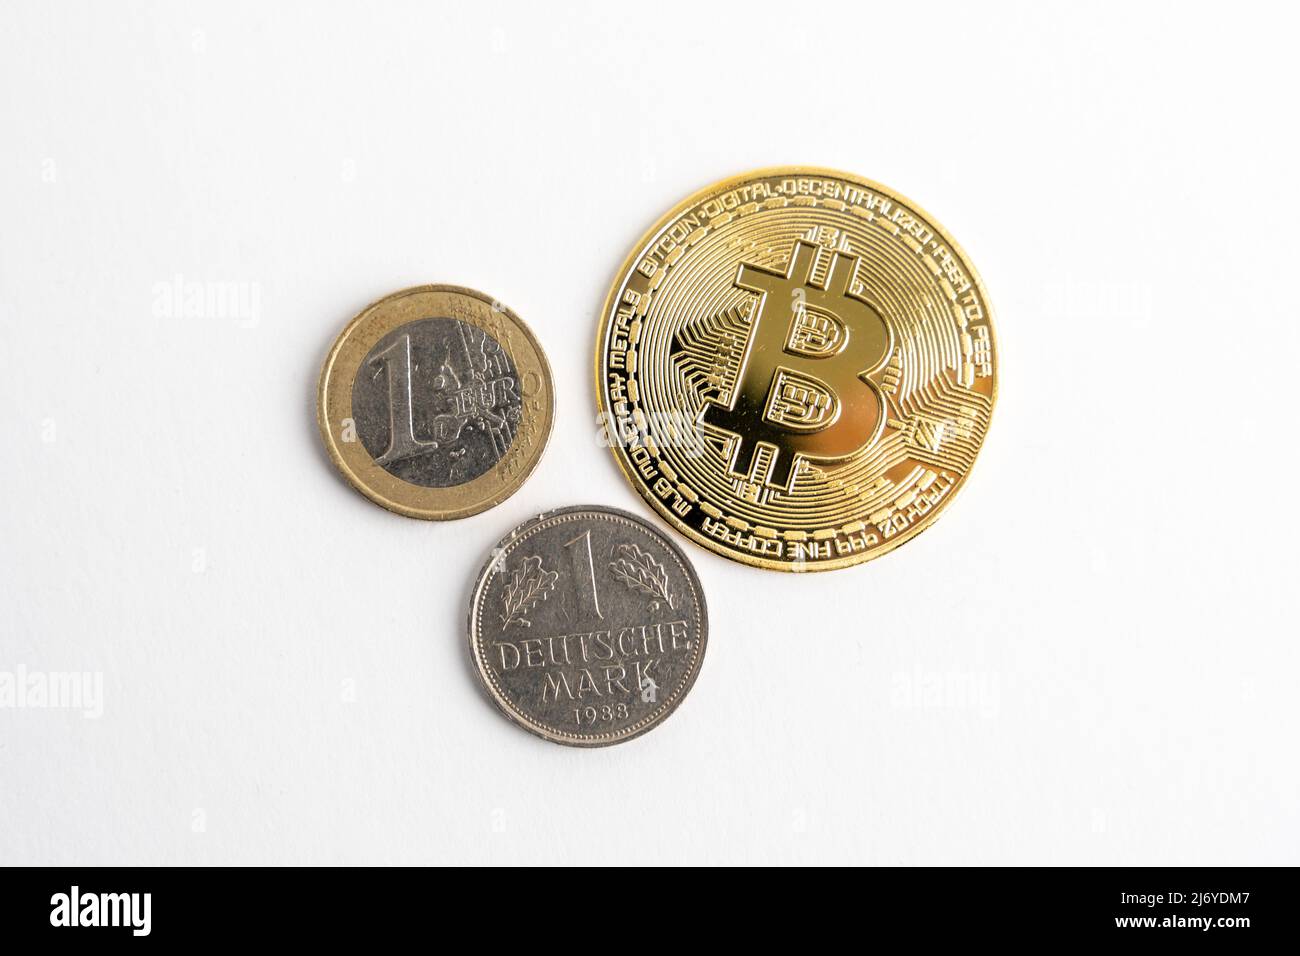 Bitcoin Euro and Deutsche Mark Coins  on a white background. German hard cash money evolution over time. Stock Photo